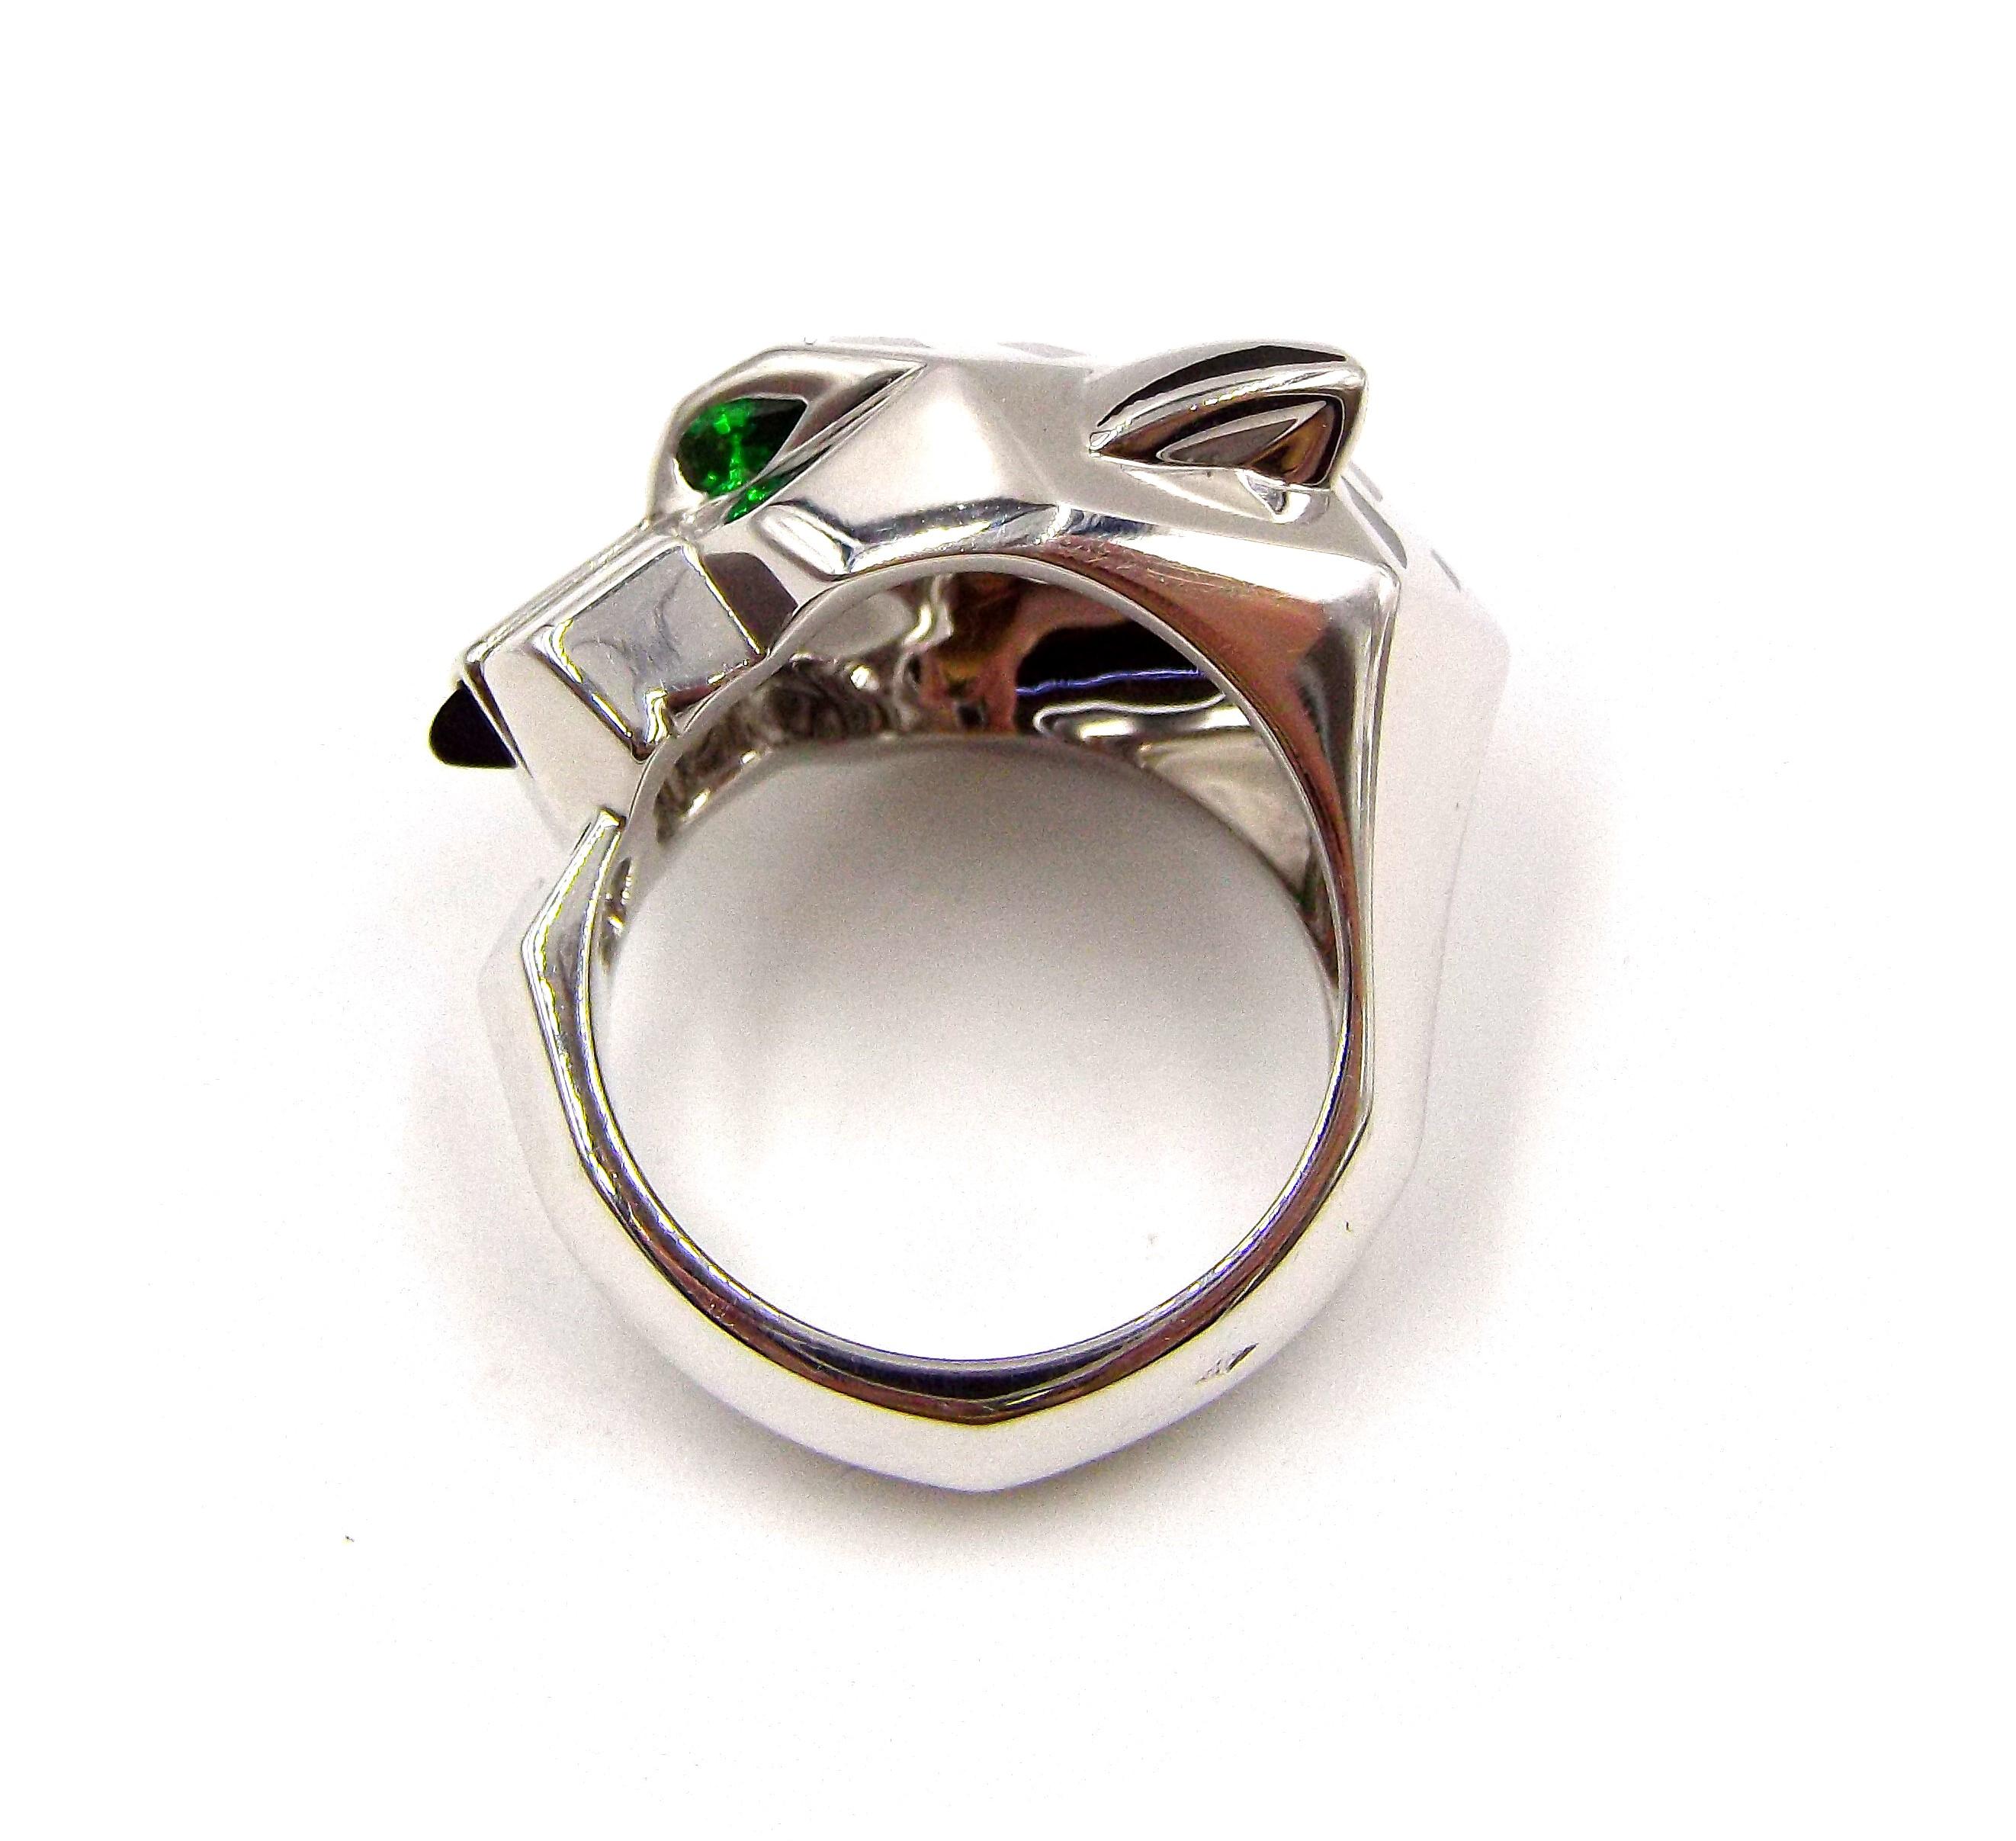 European size 56, US size 7.5. Item weight is 28.2 grams, made of 18K white gold. Eyes set with tsavorite garnets. Onyx nose, black lacquer spots. Comes with box and papers.